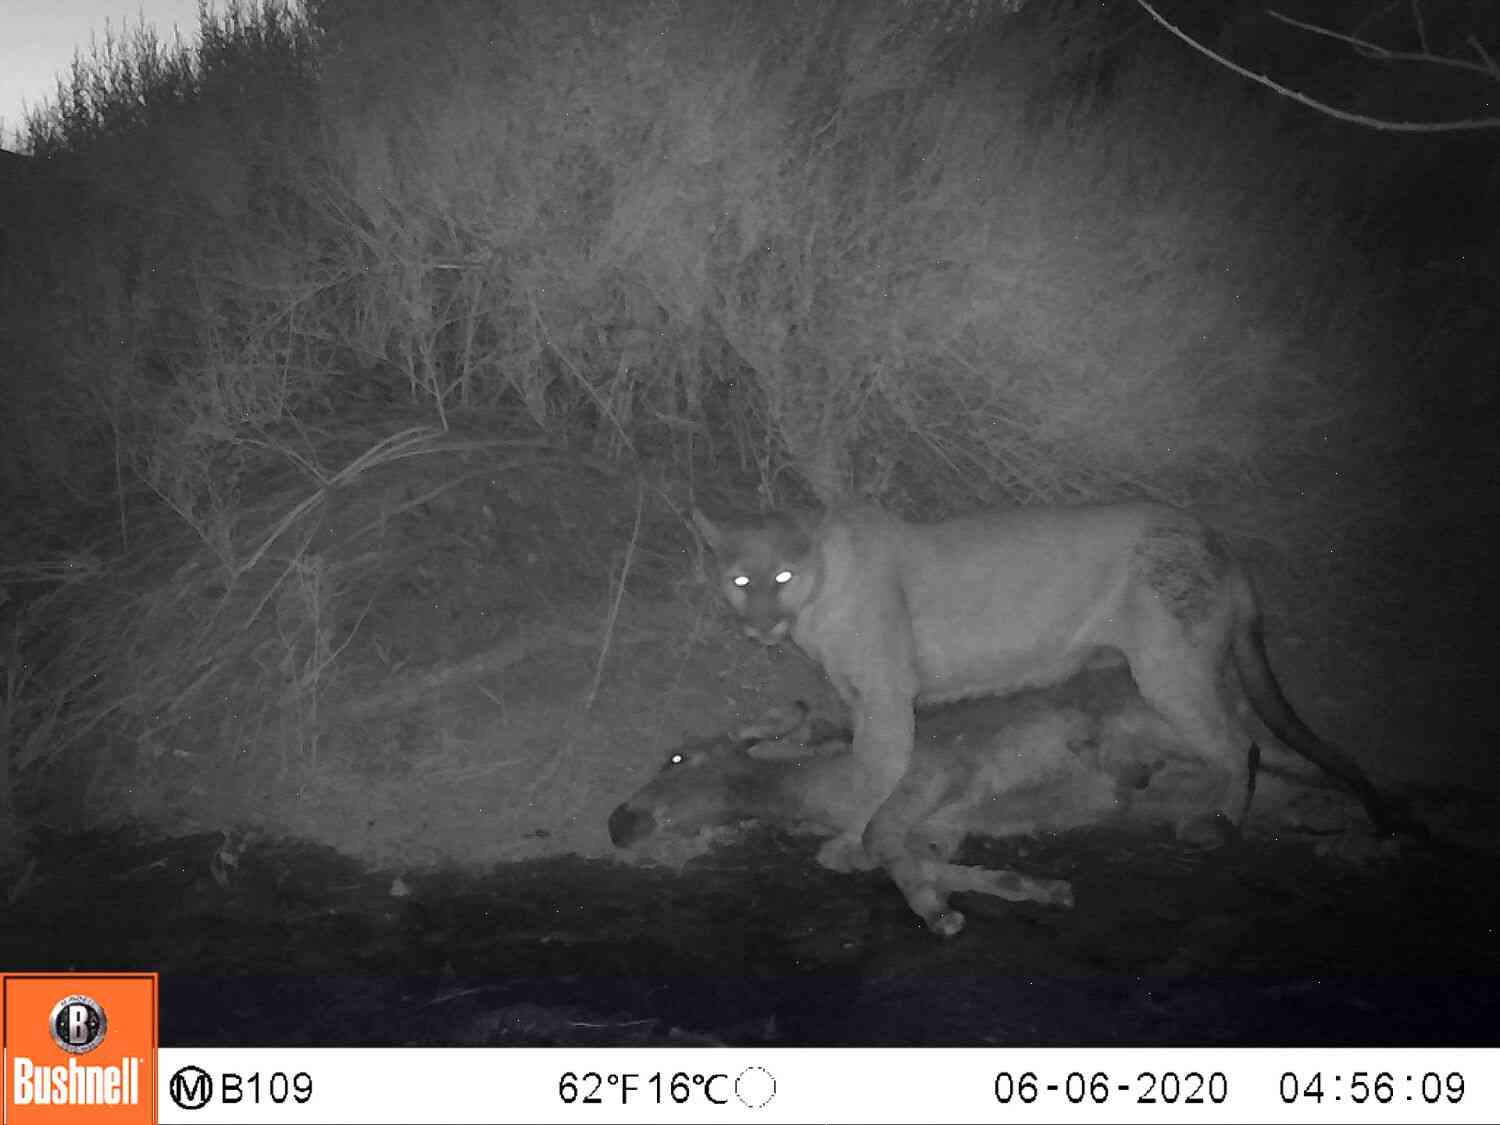 Mountain Lions and Wild Horses Have Nothing in Common